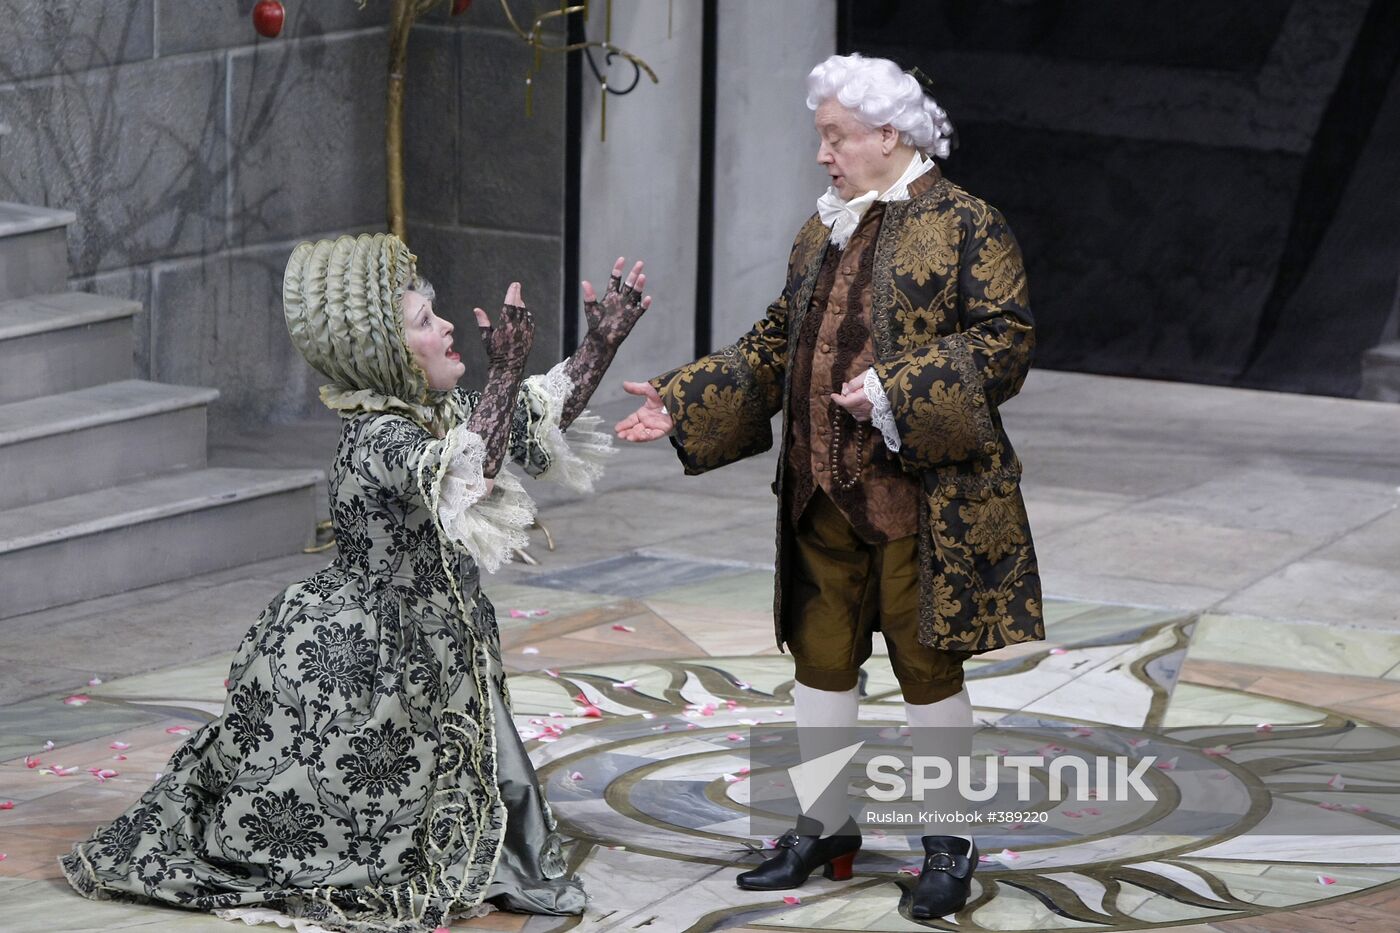 Tabakov Theater premiers The Marriage of Figaro